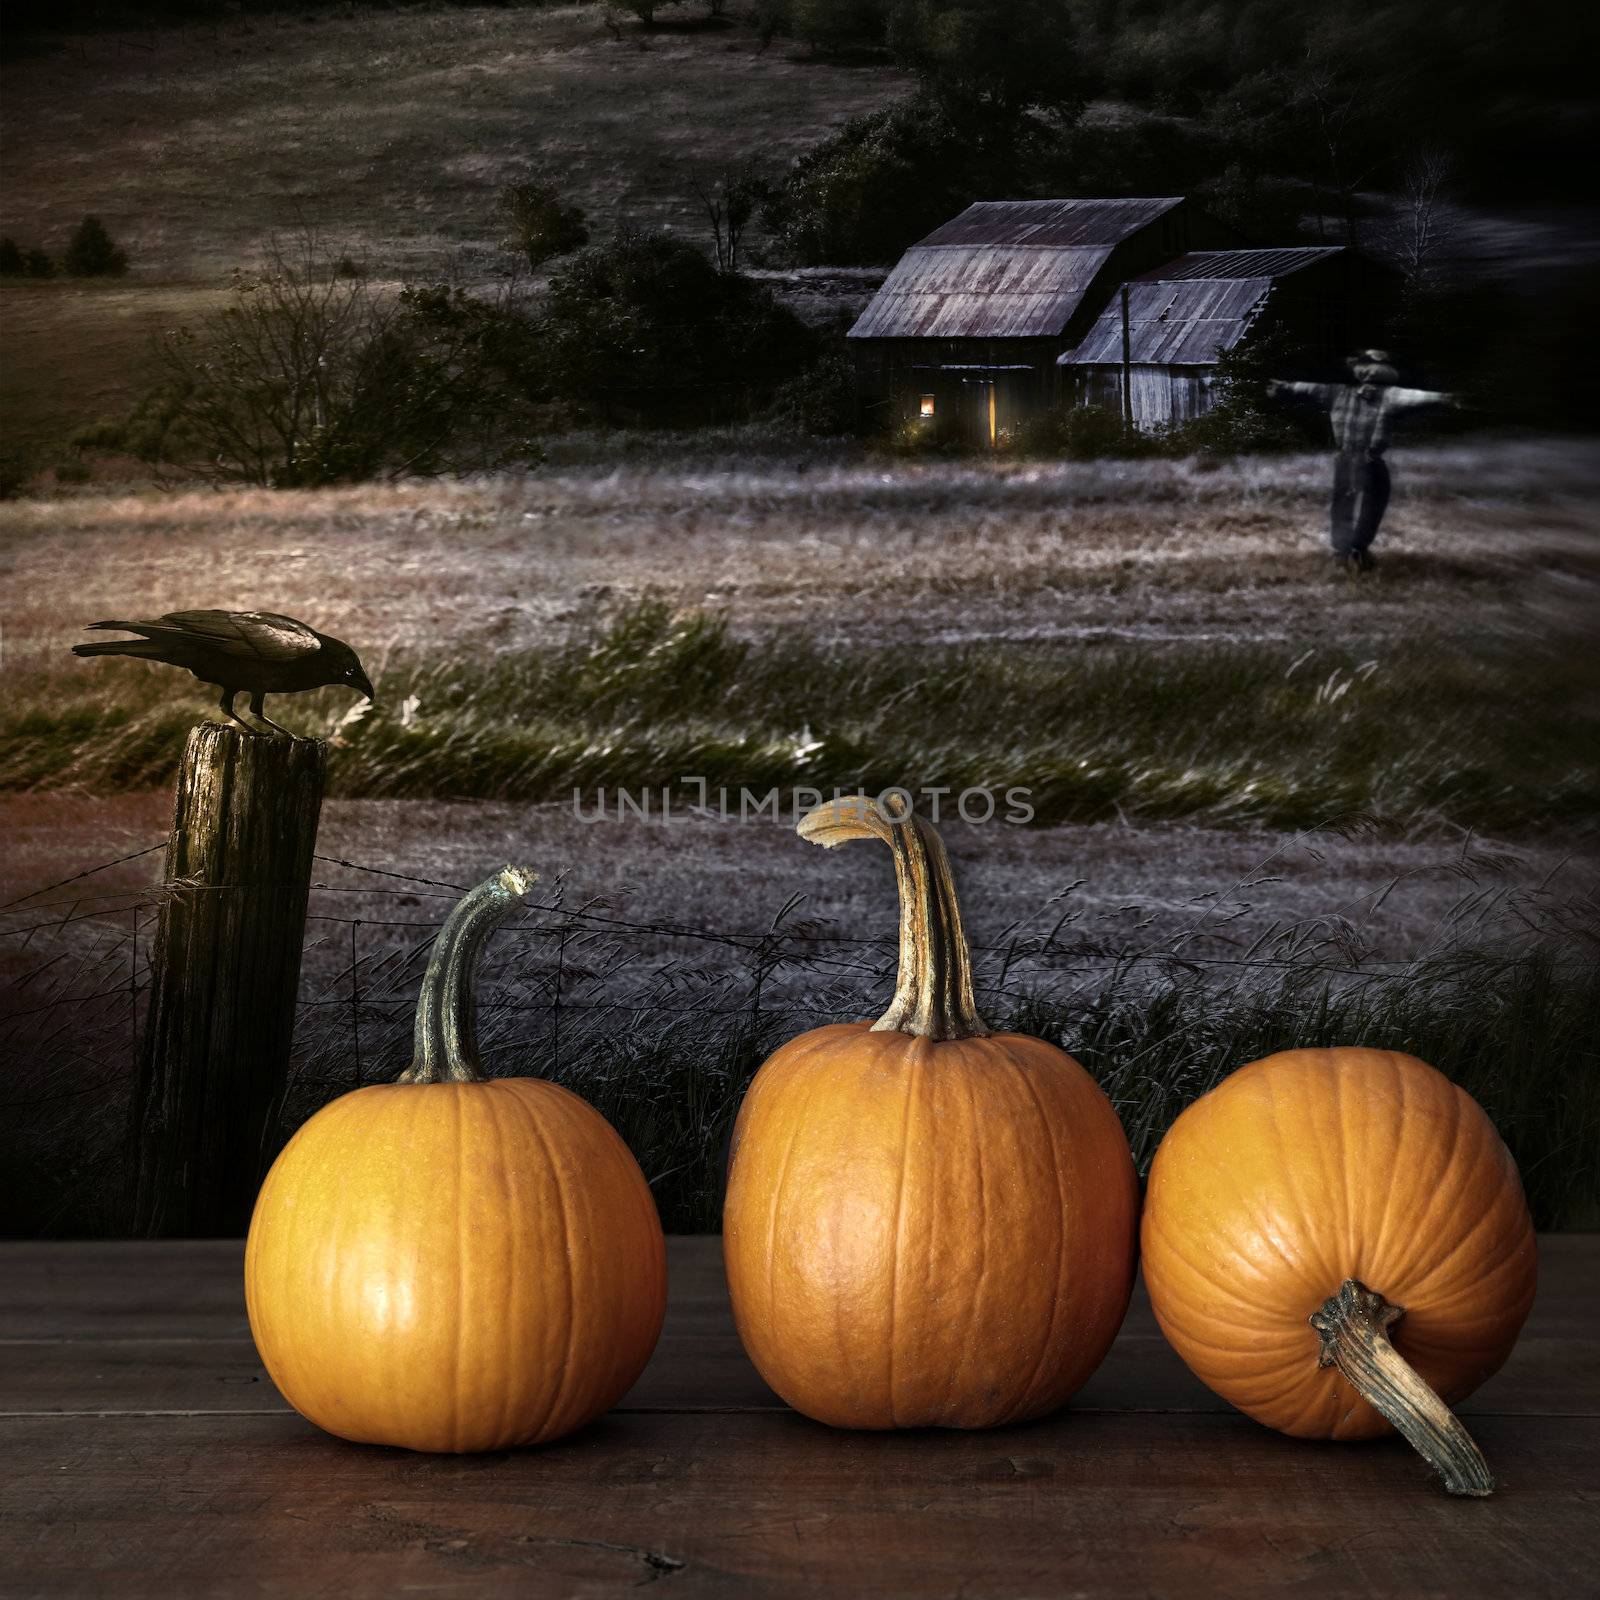 Pumpkins left on table at night by Sandralise